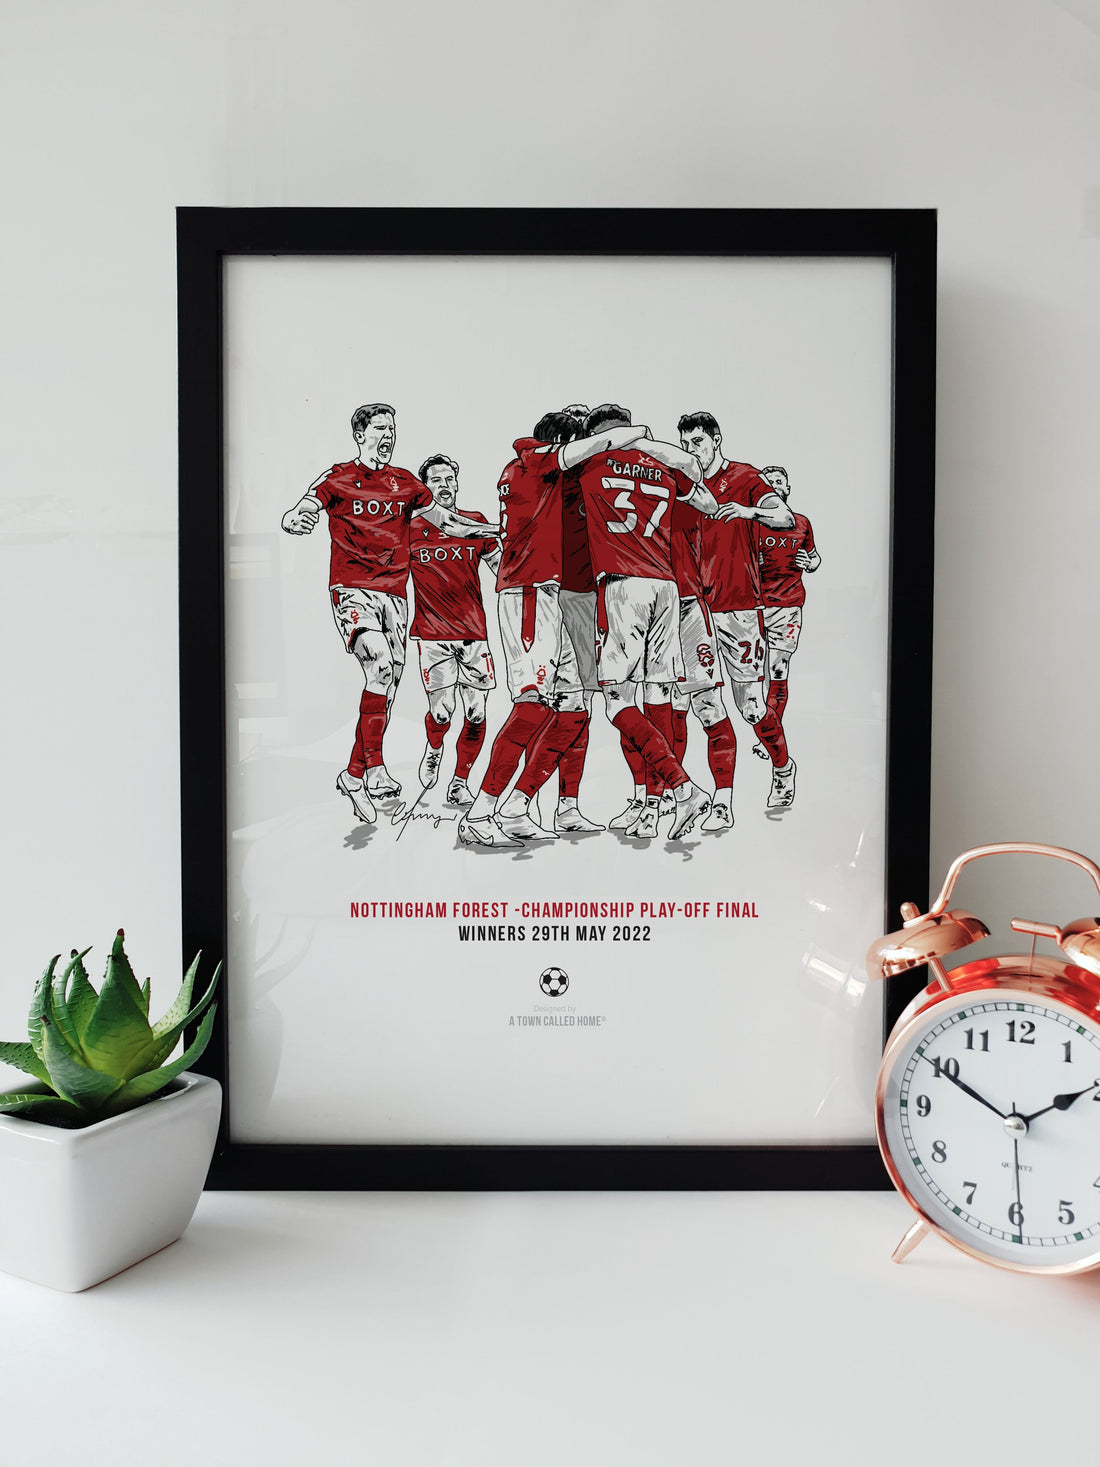 nottingham forest football club artwork & prints. hand drawn and illustrated by a town called home. Features the squad celebrating their championship play-off final victory promoting them to the premier  league